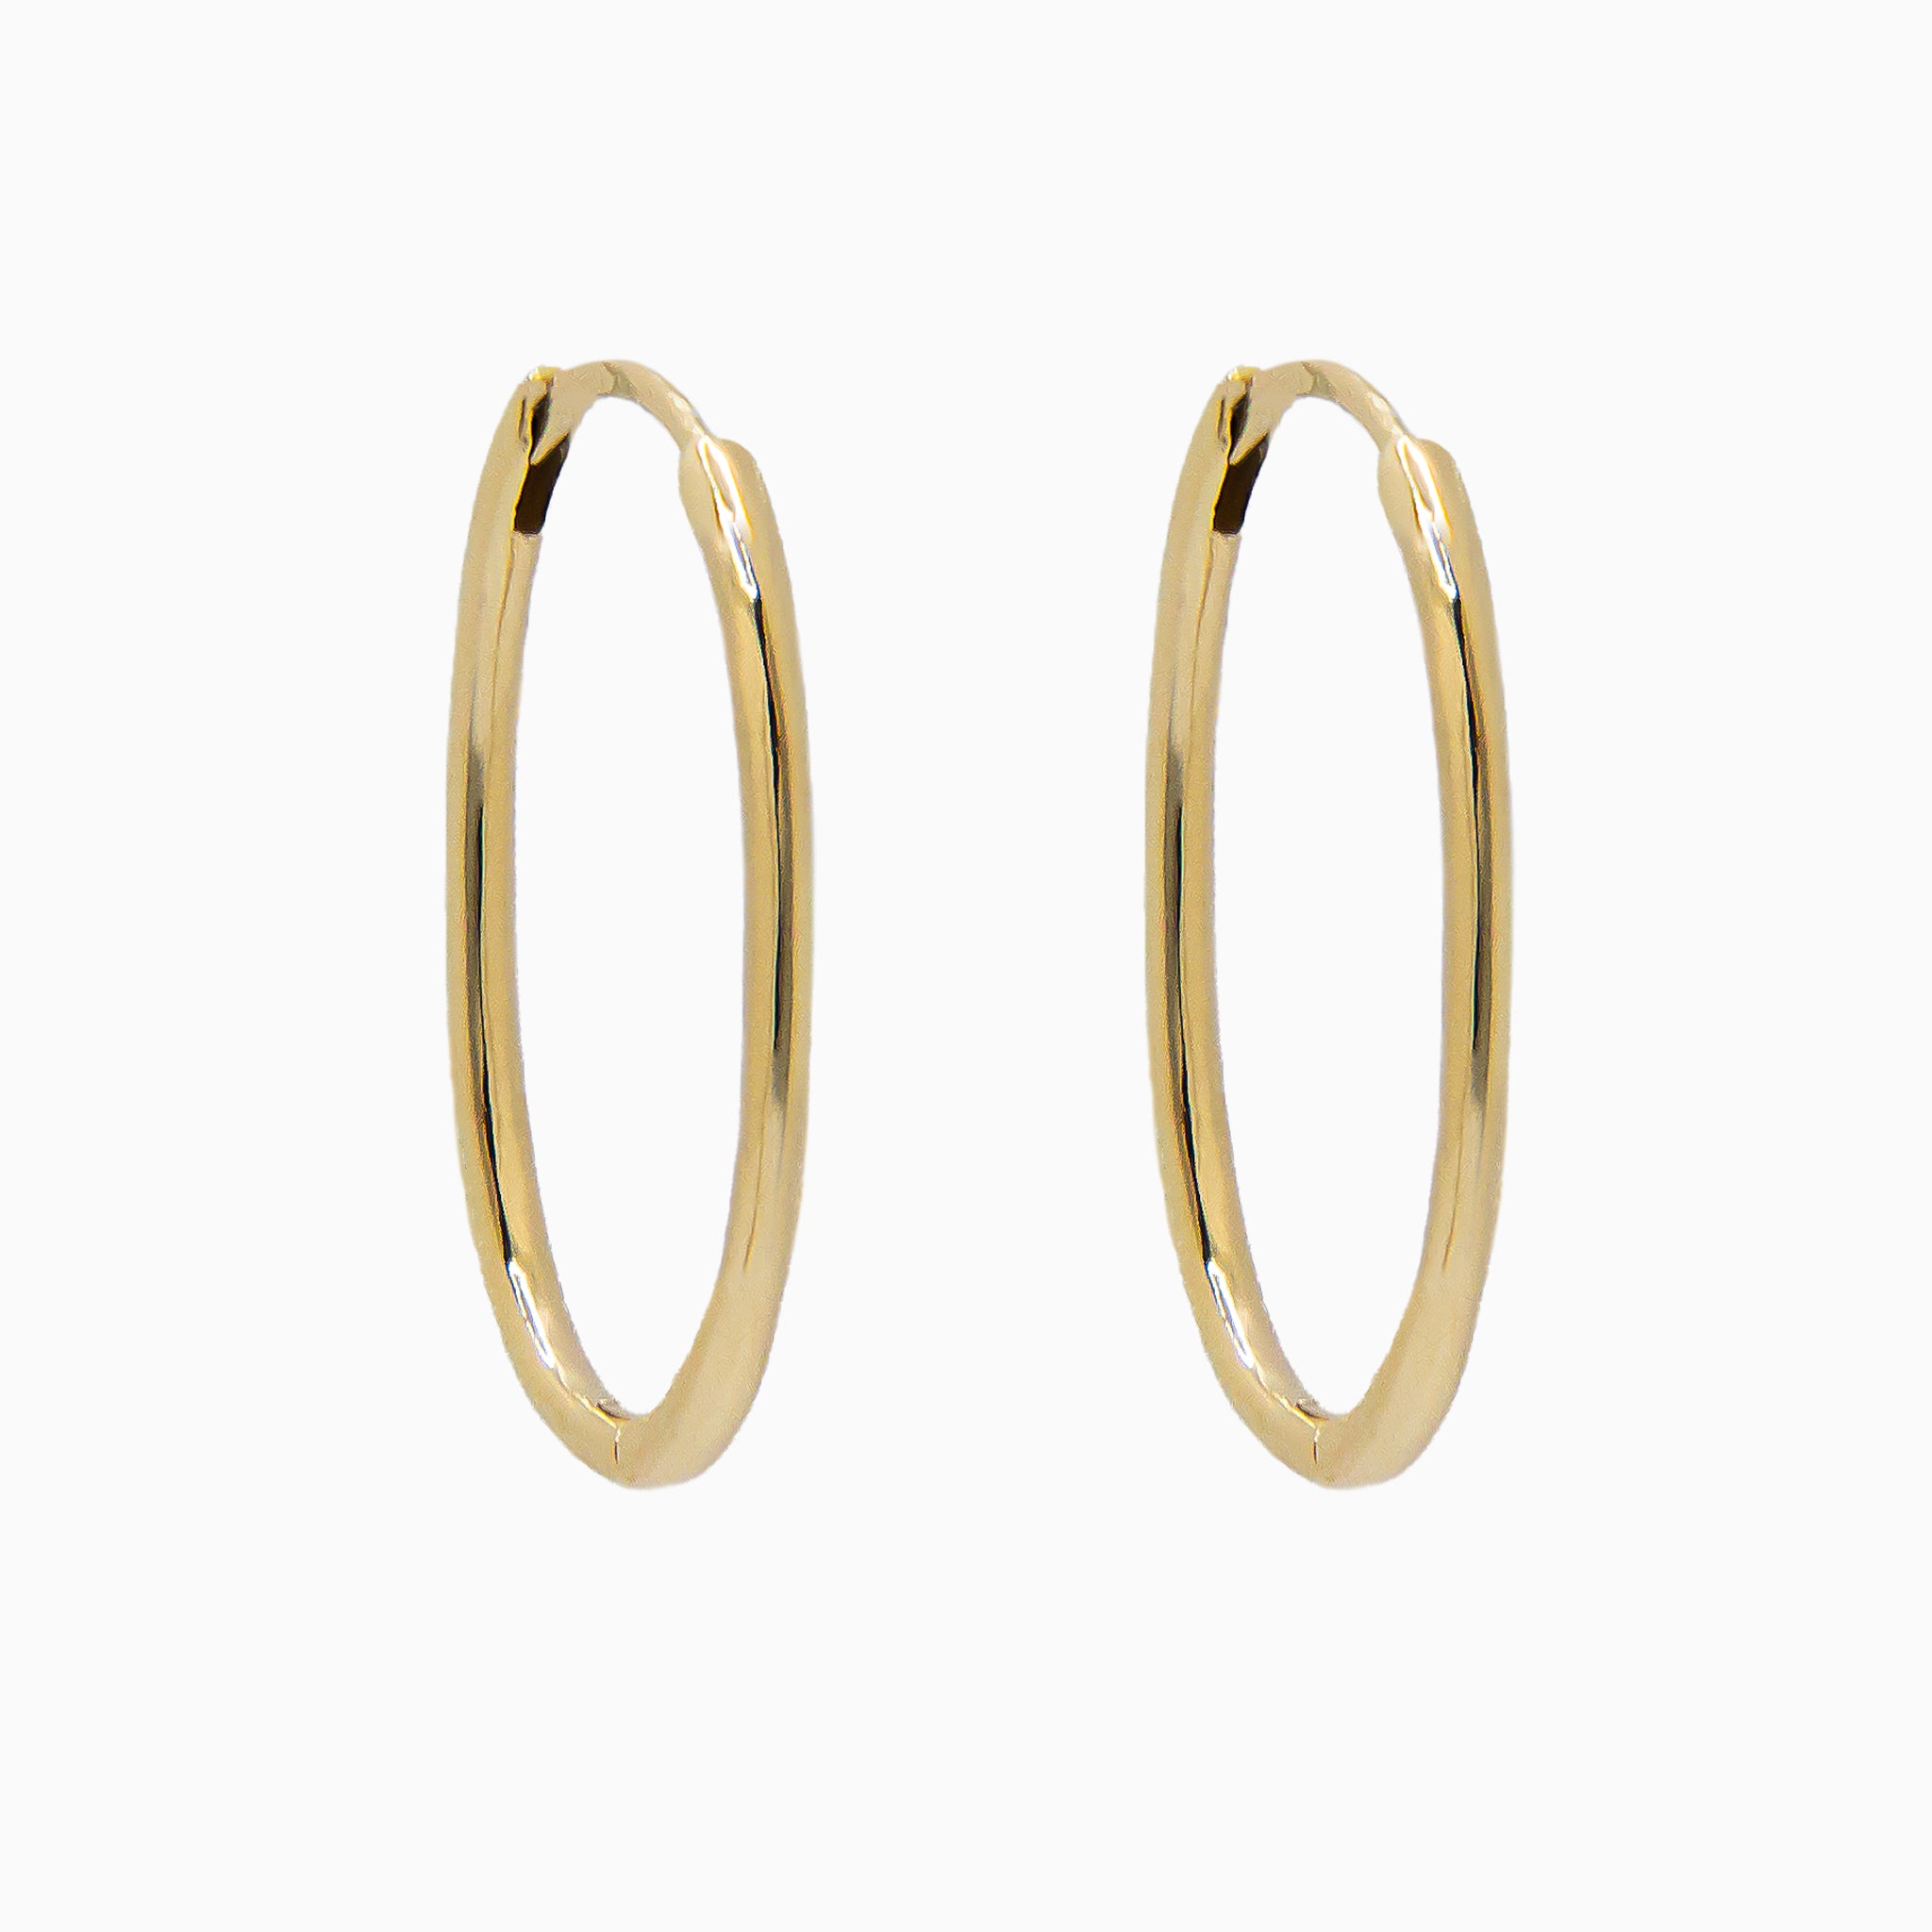 14k Yellow Gold 23mm x 15mm Hinged Everyday Oval Hoop Earrings